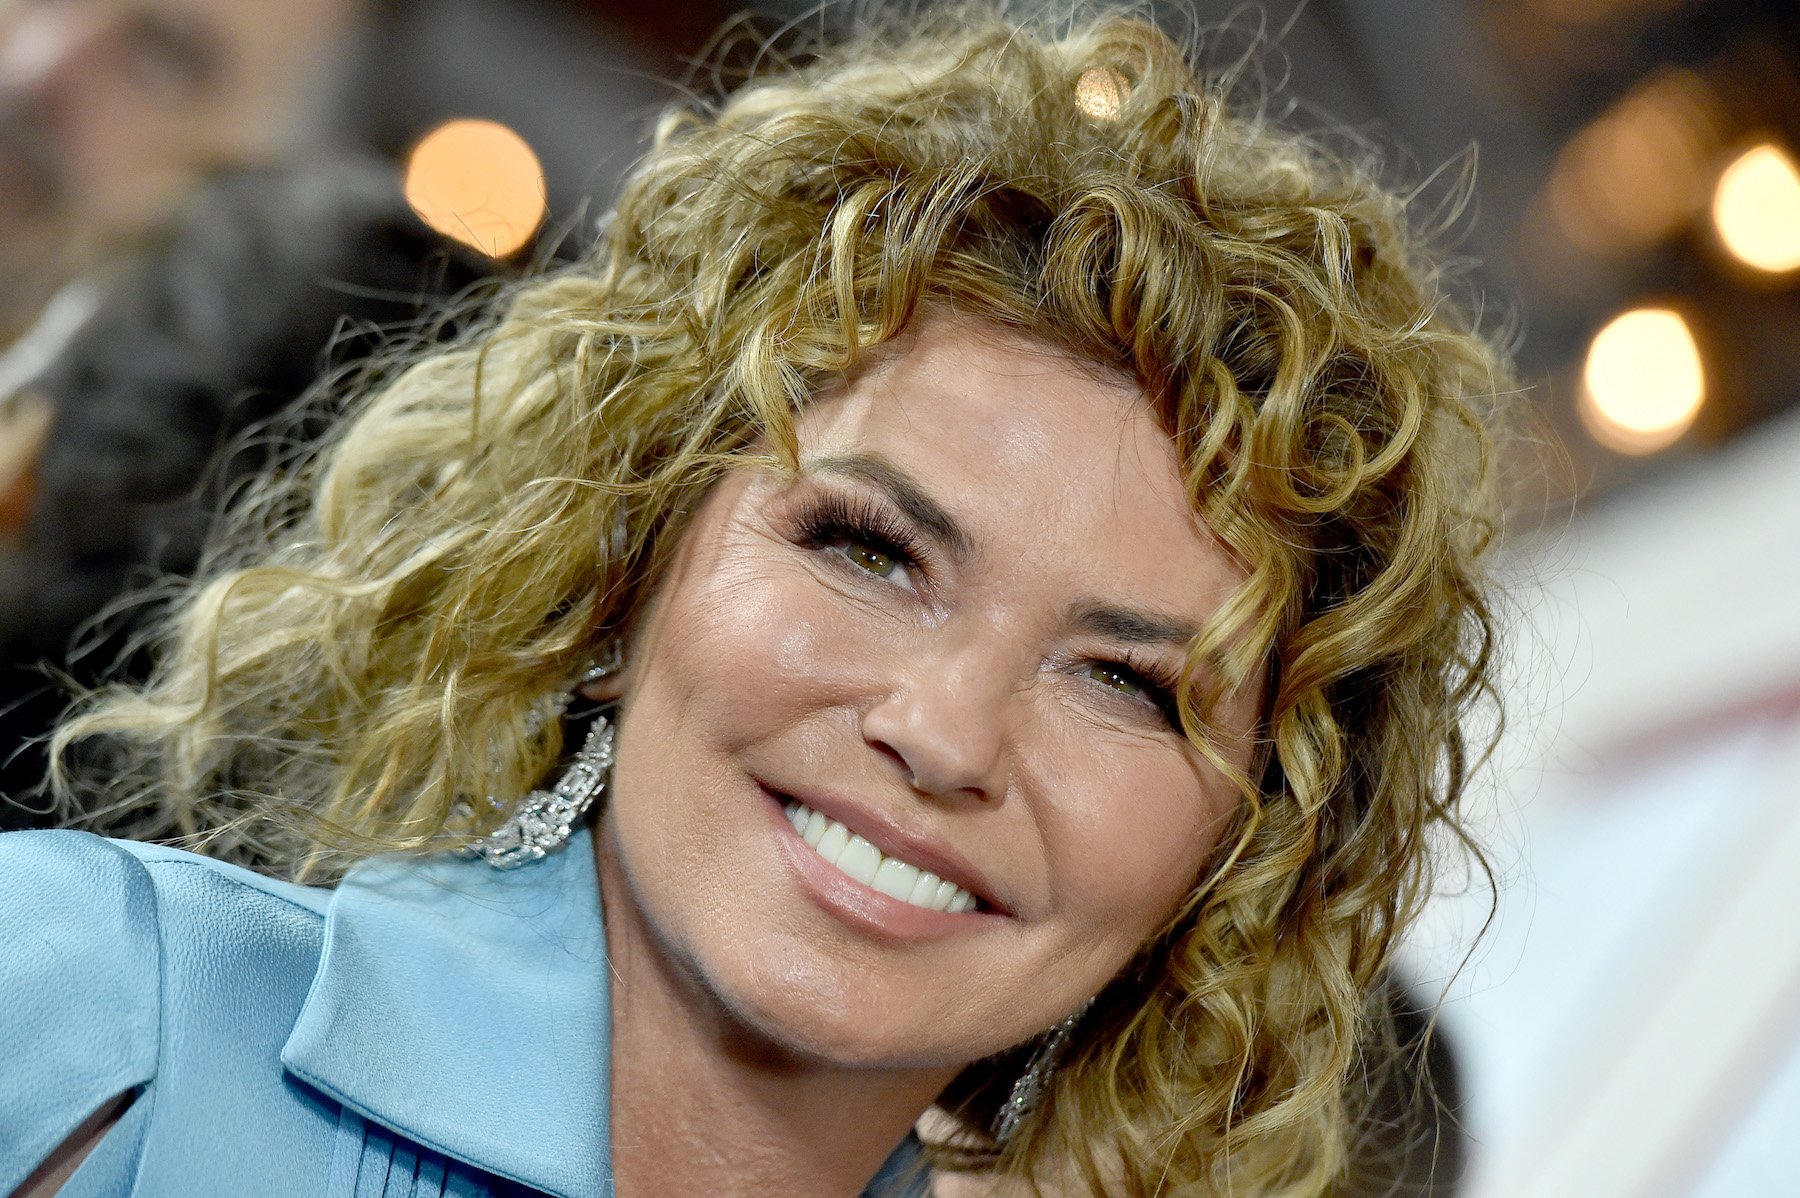 Shania Twain, who has peed on stage multiple times, wearing turqoise and smiling for a photo